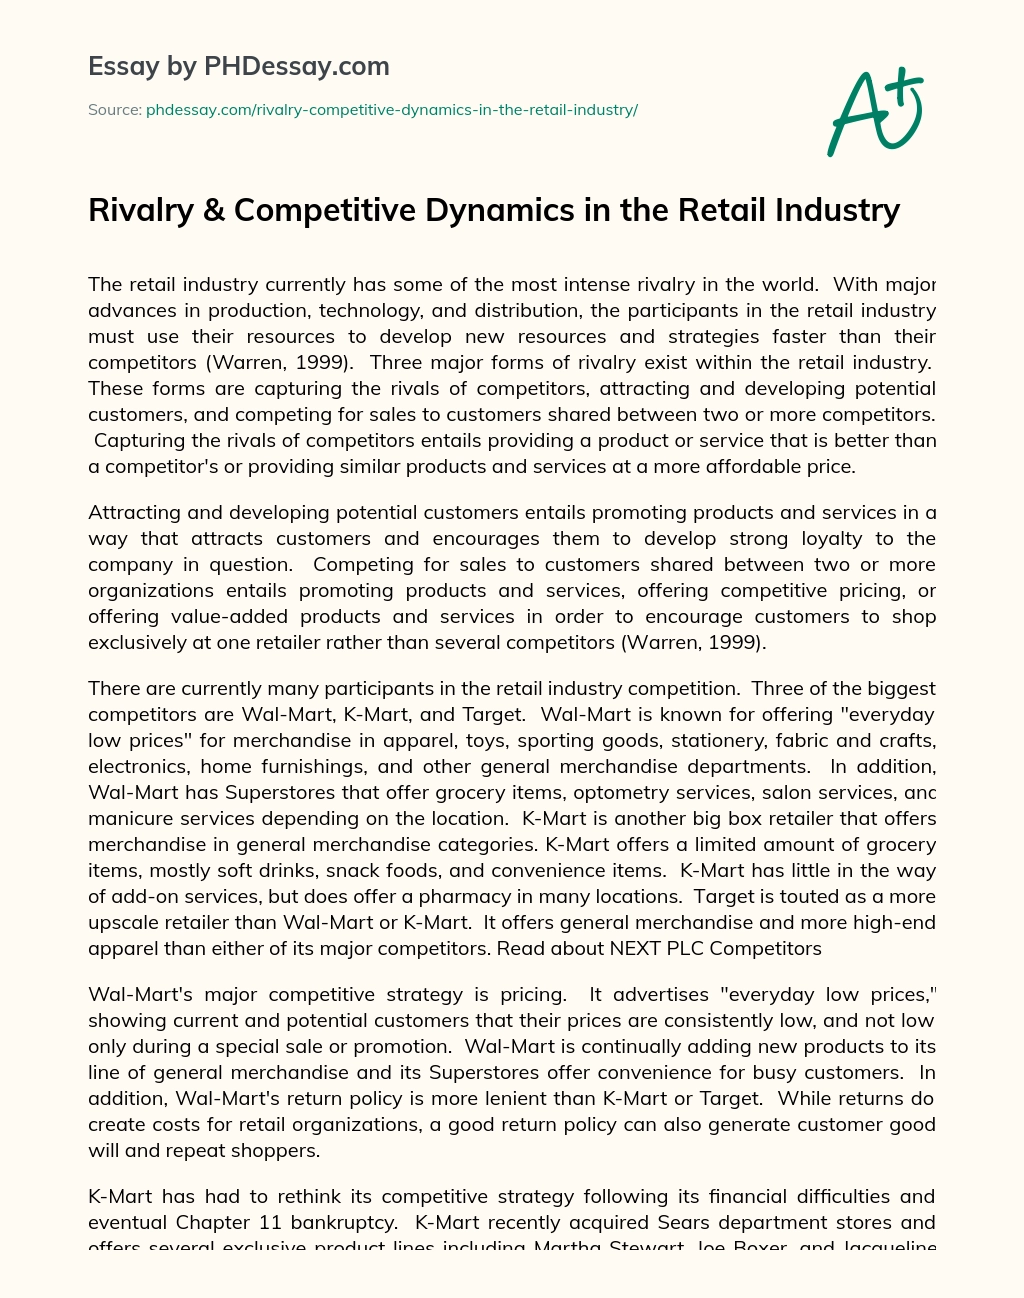 Rivalry & Competitive Dynamics in the Retail Industry essay